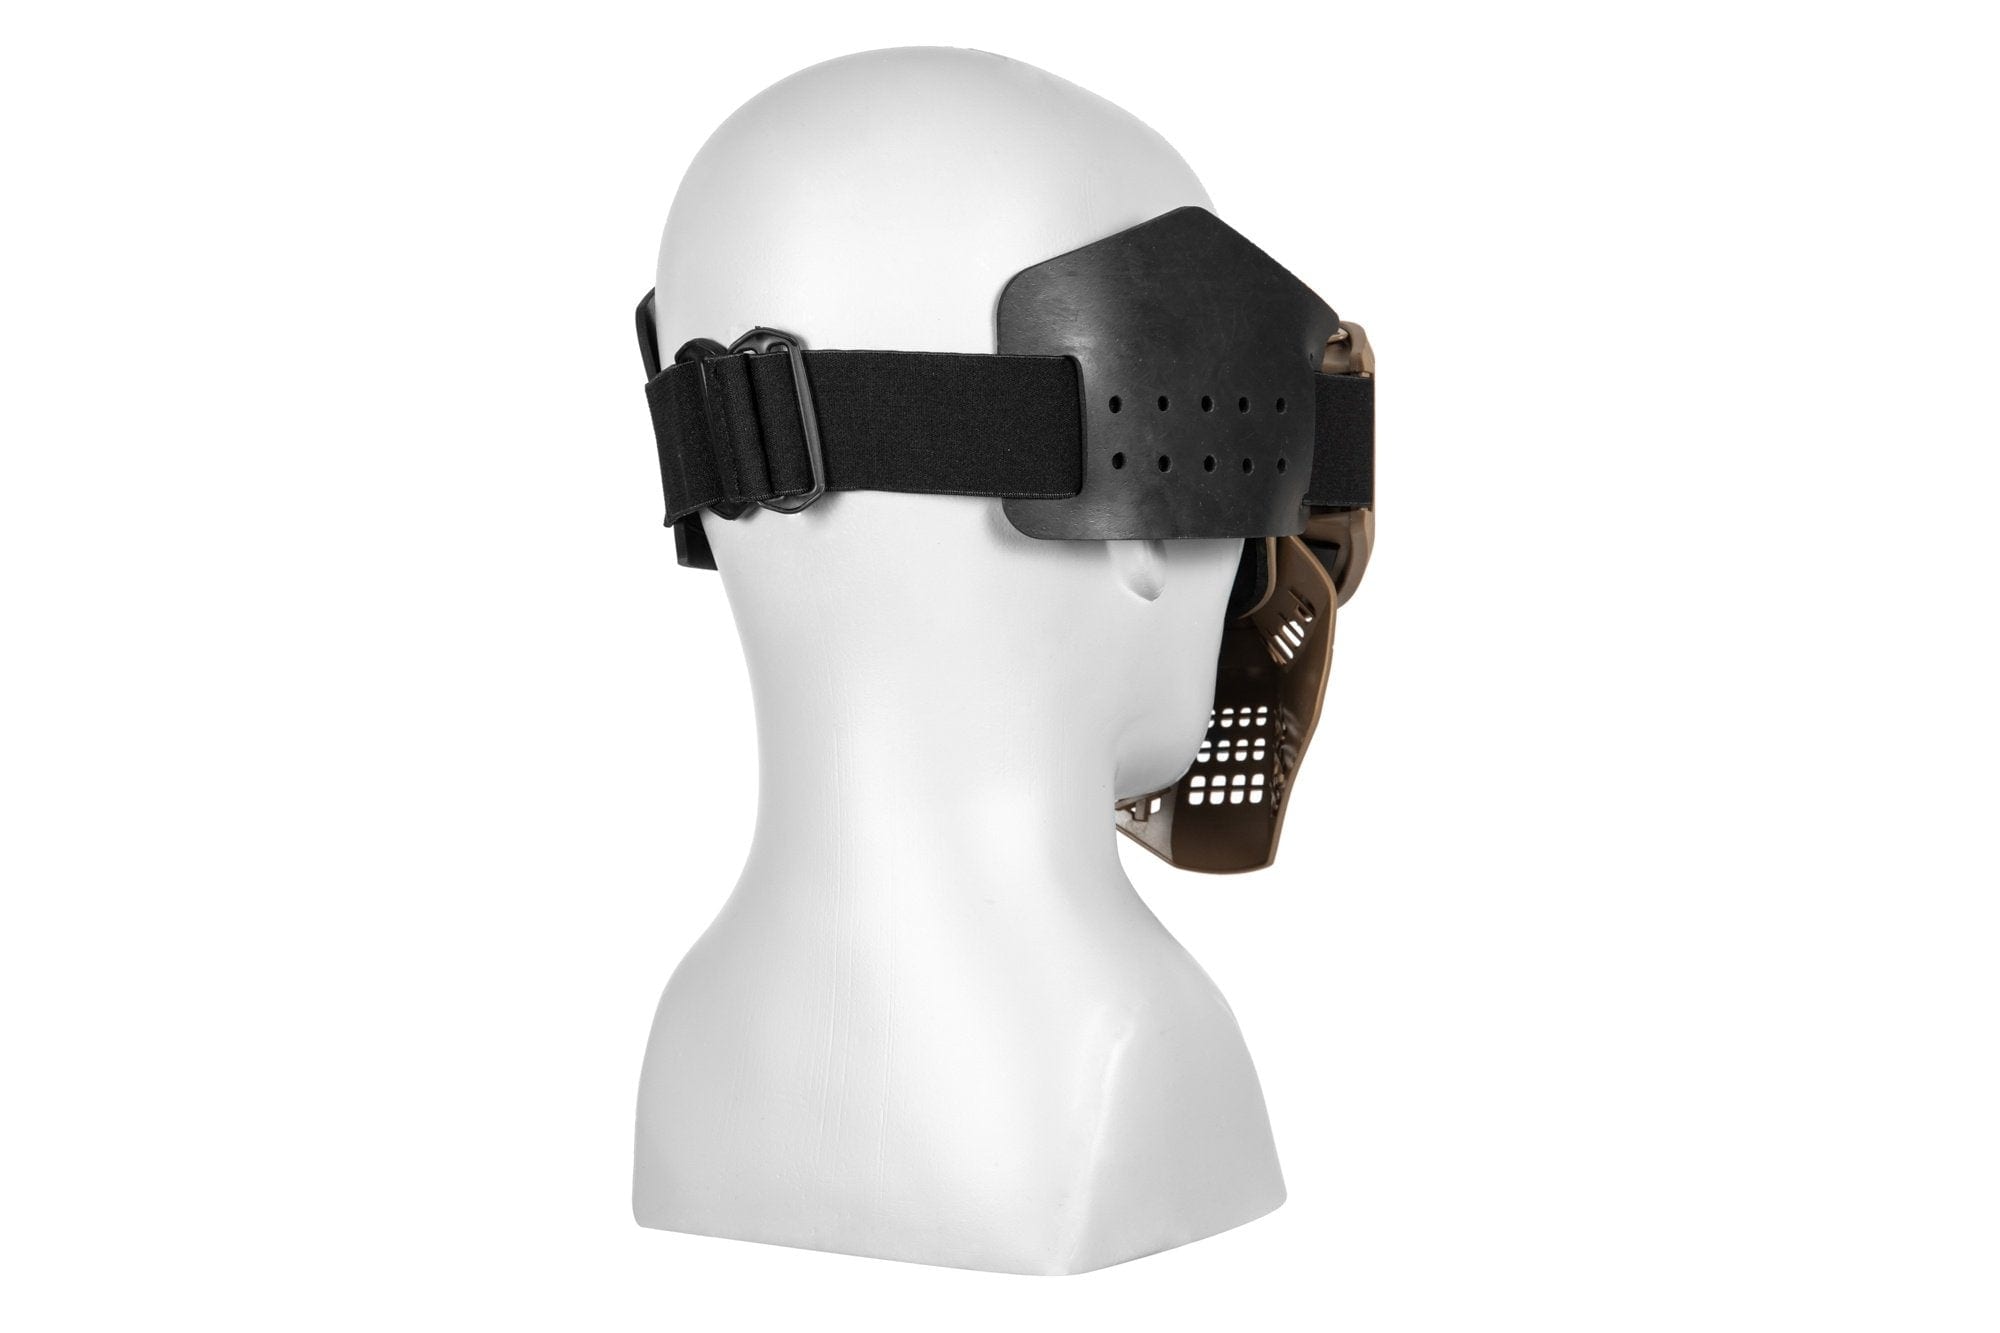 JT Full Face Mask with Goggles - Dark Earth